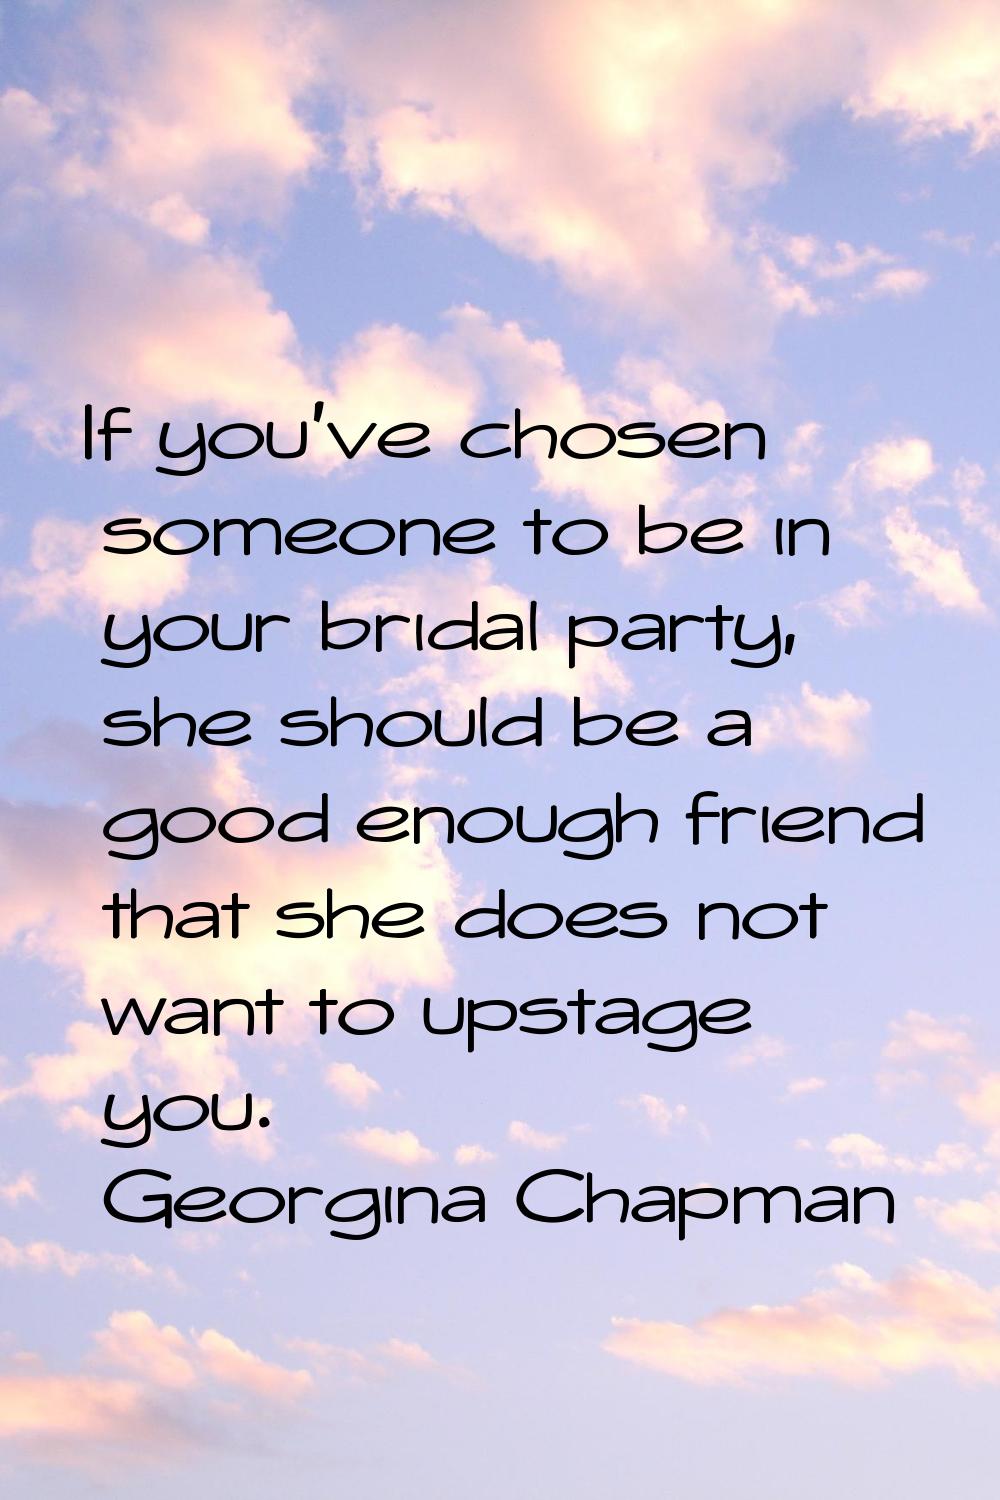 If you've chosen someone to be in your bridal party, she should be a good enough friend that she do